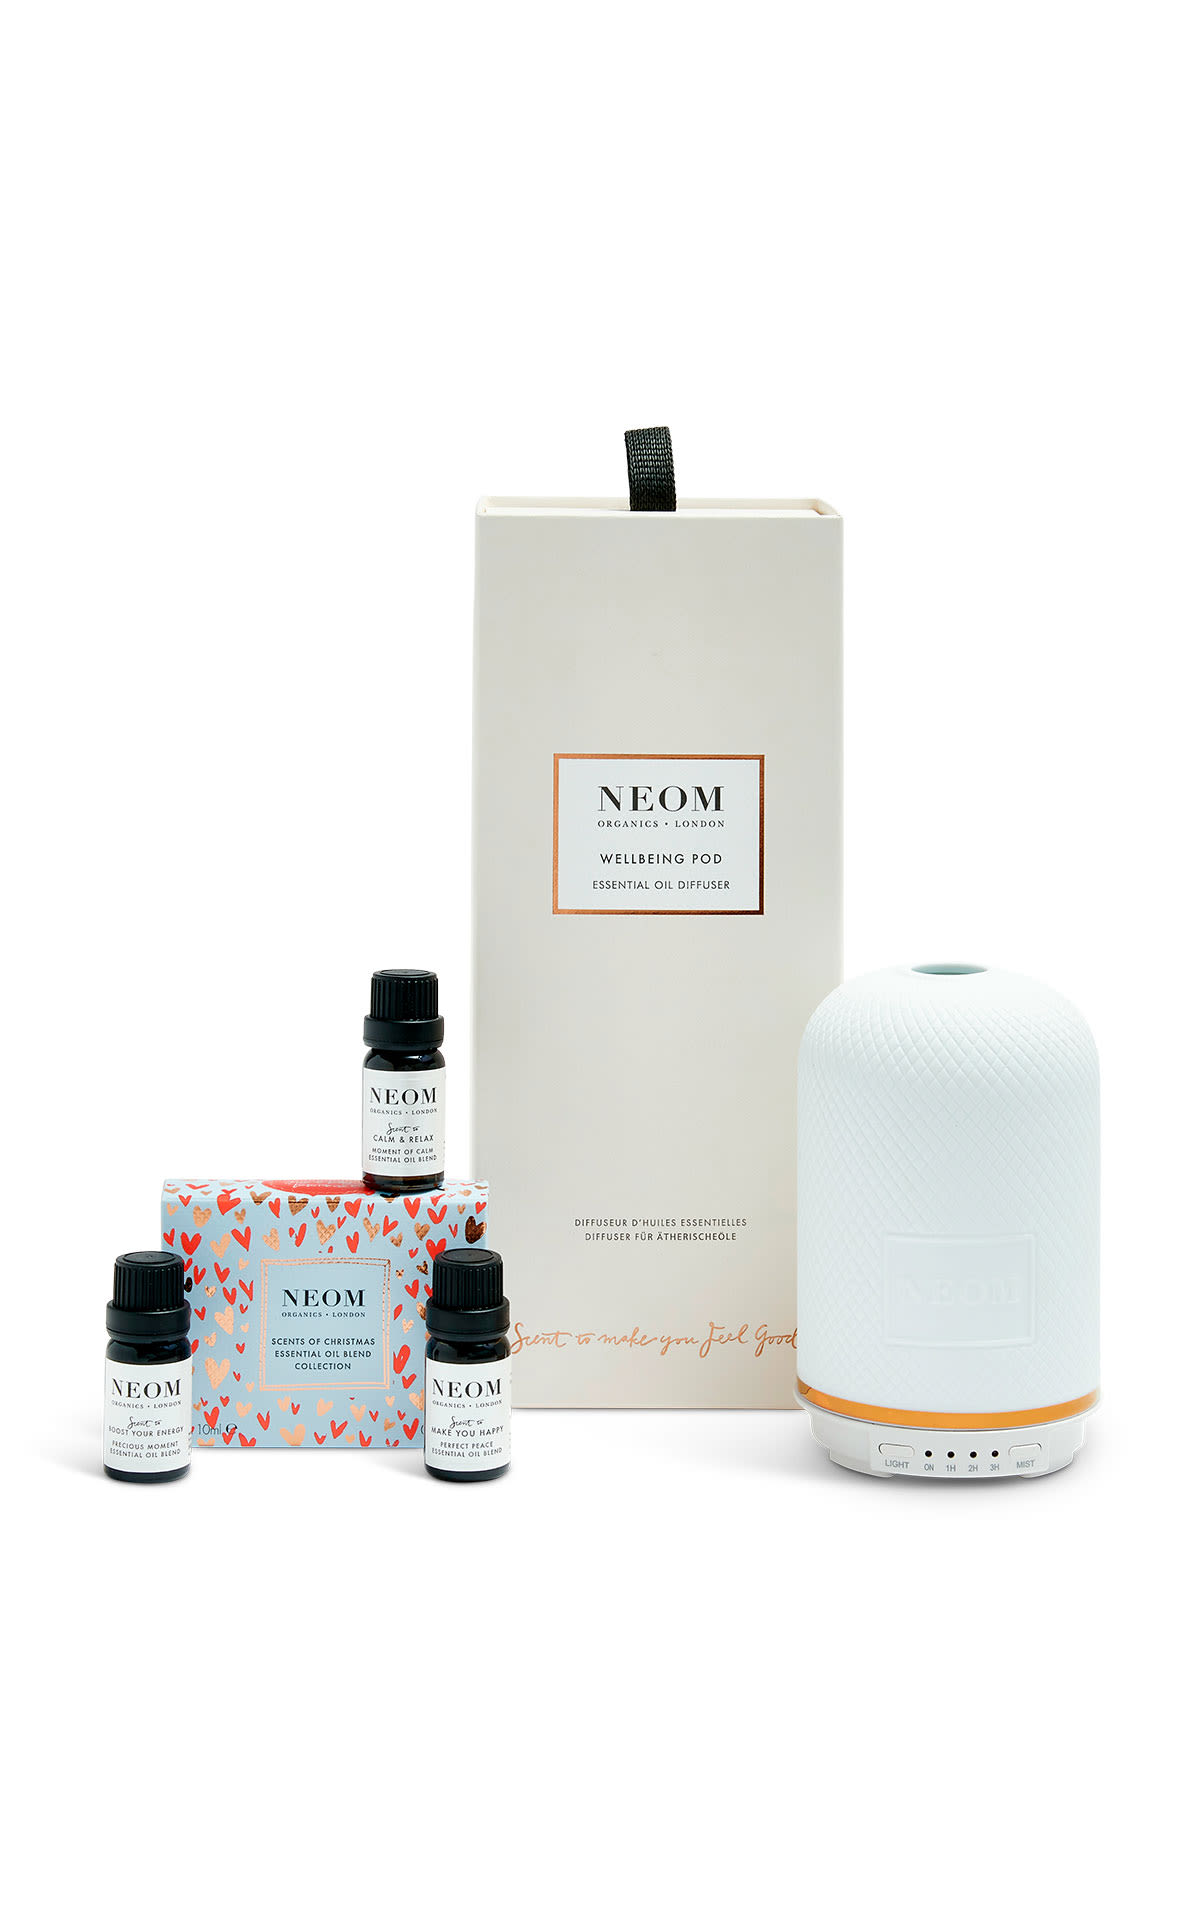 NEOM Xmas pod collection from Bicester Village